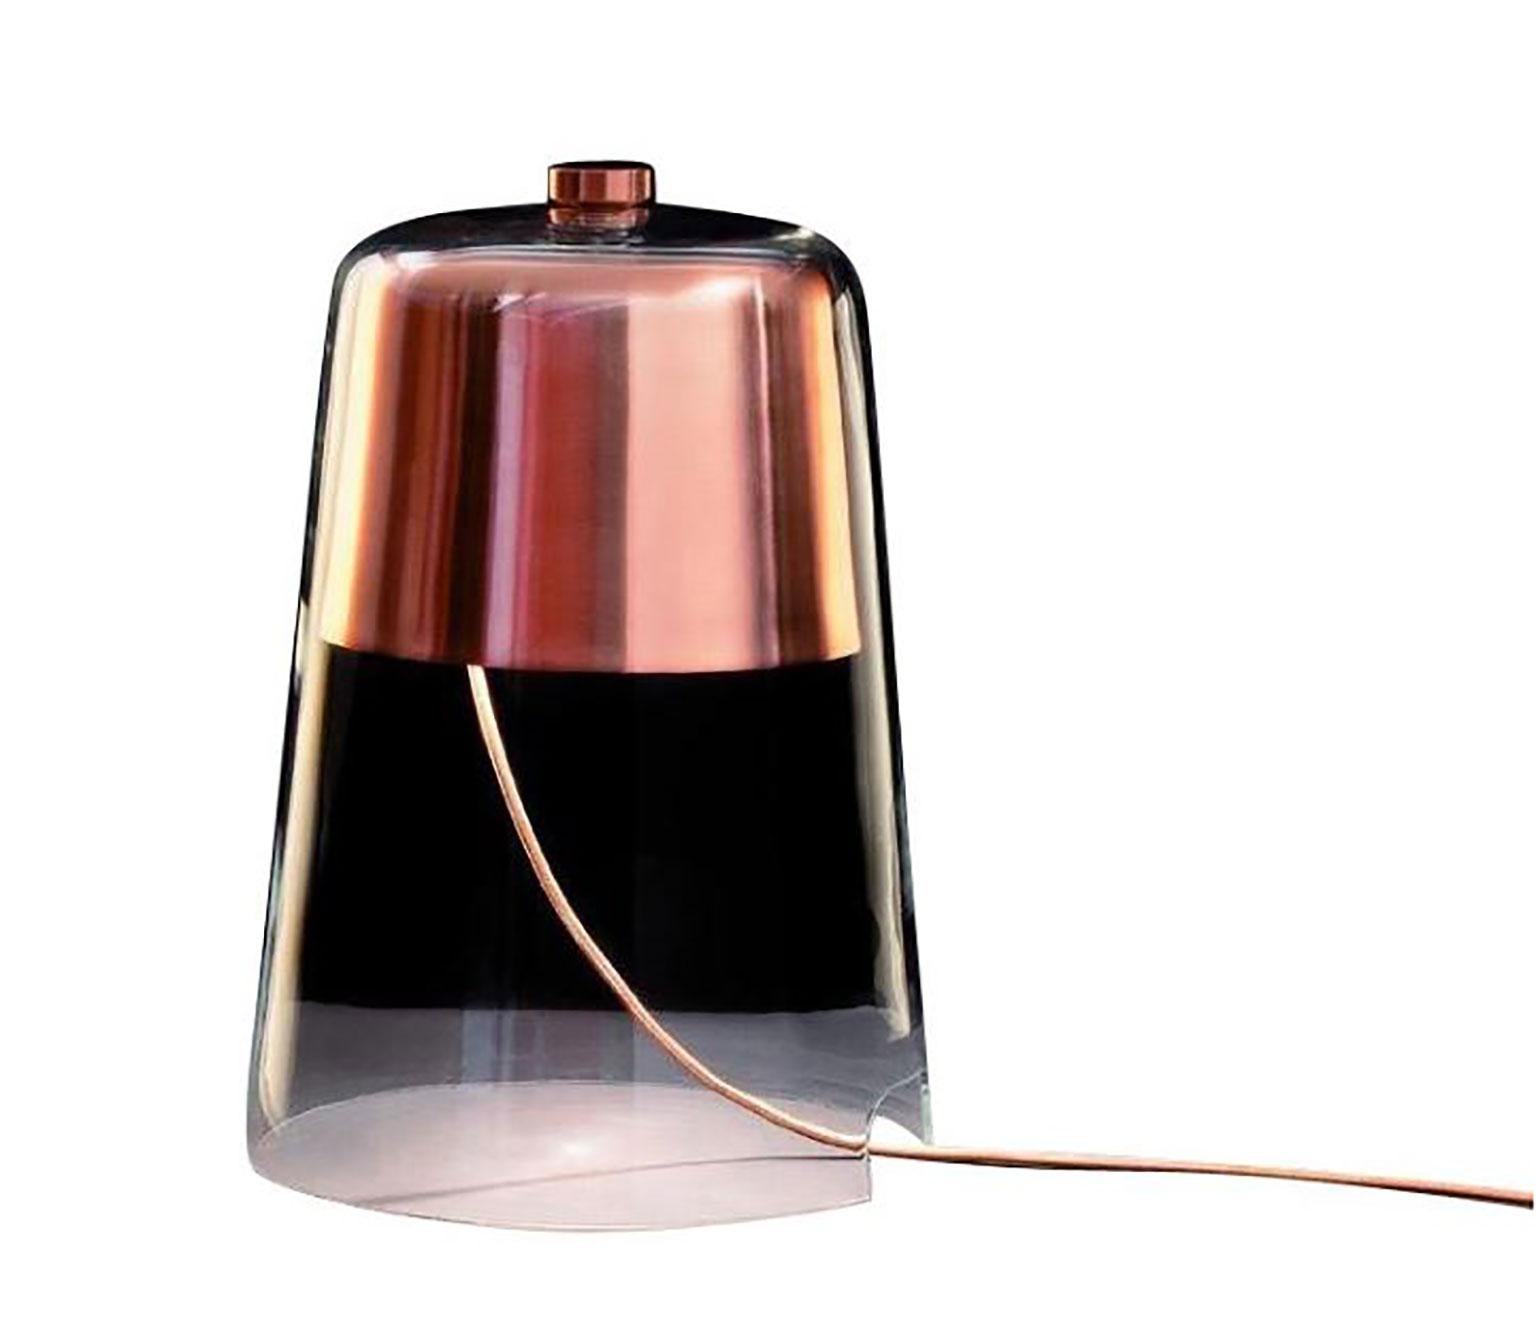 Semplice table lamp designed by Sam Hecht for Oluce. This elegant and simple design consists of a single blown glass bell, functioning as both the diffuser and the base for the fixture. The visionary simple combination of structure and design is